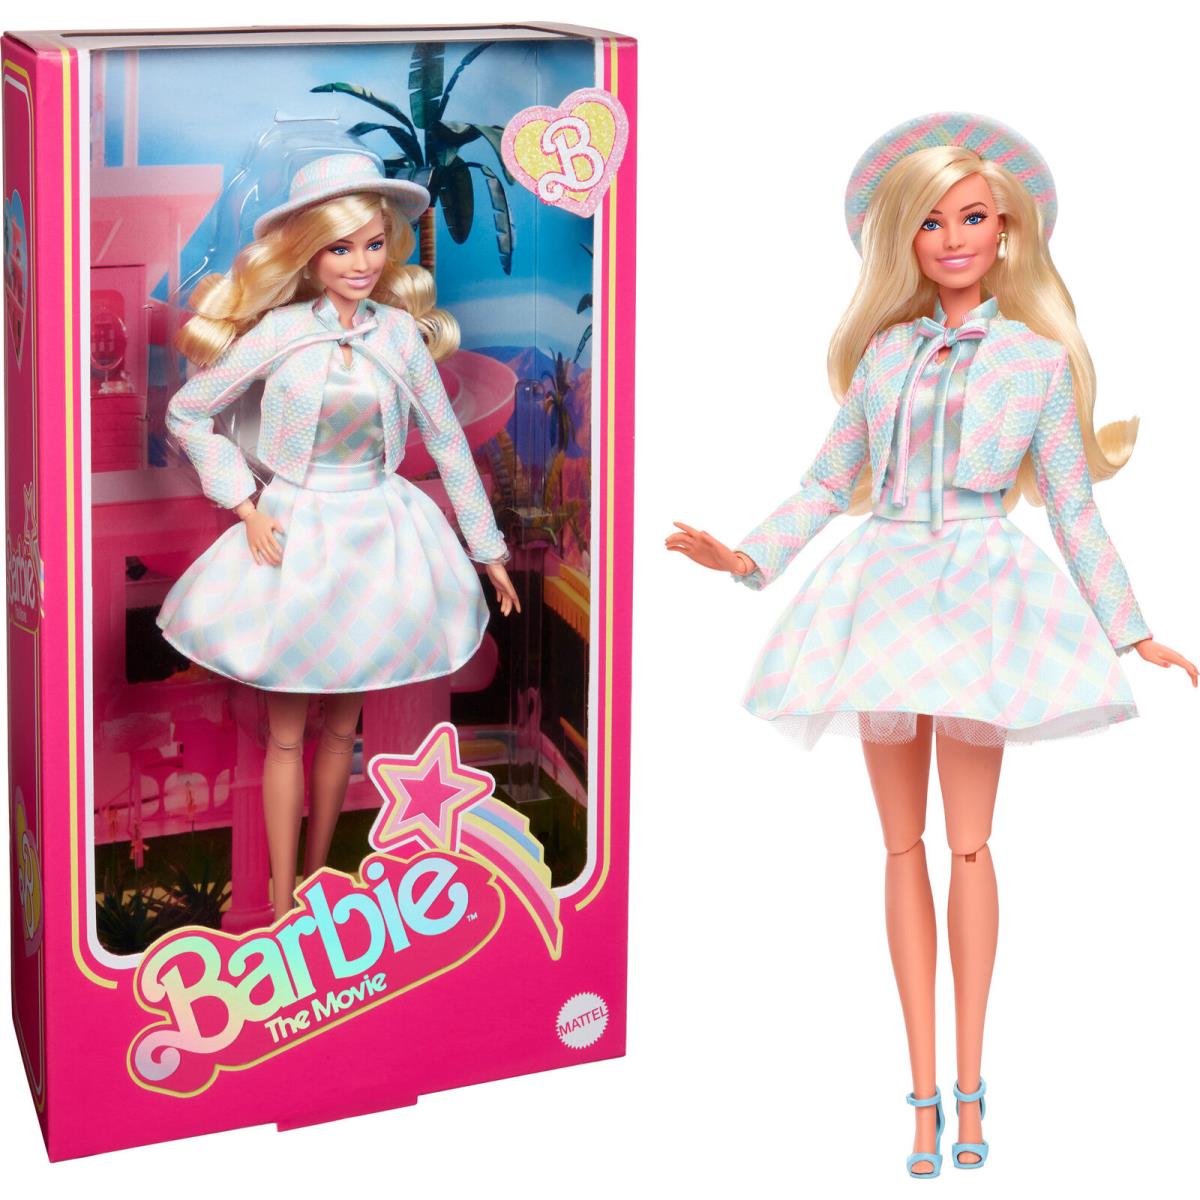 Barbie The Movie Collectible Doll Margot Robbie as Barbie in Plaid Matching Set